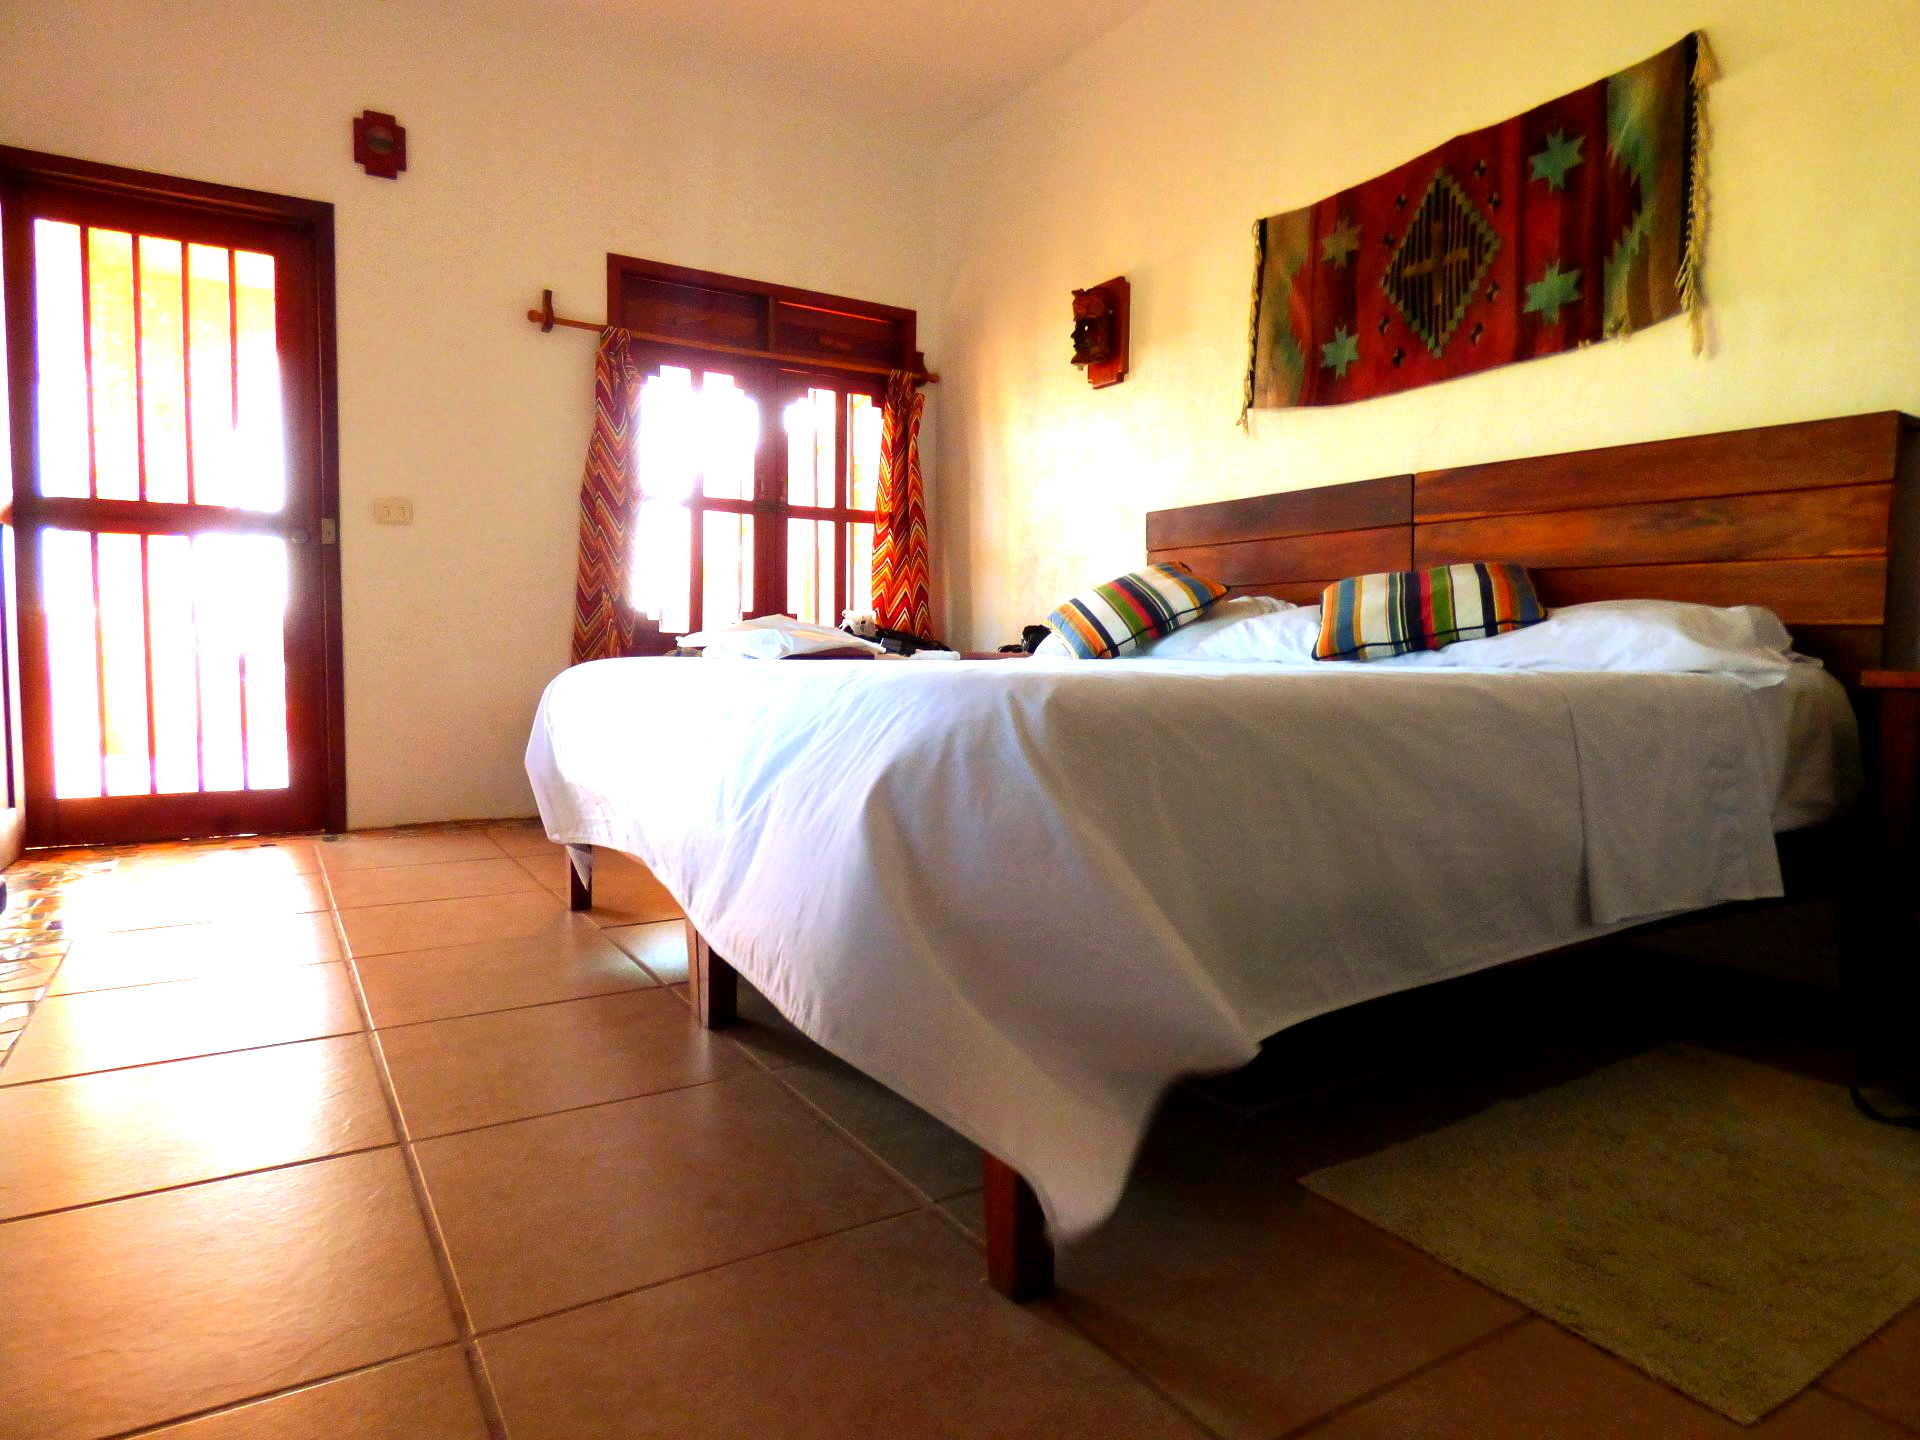 Uxmal King sized bed and Talevera sink